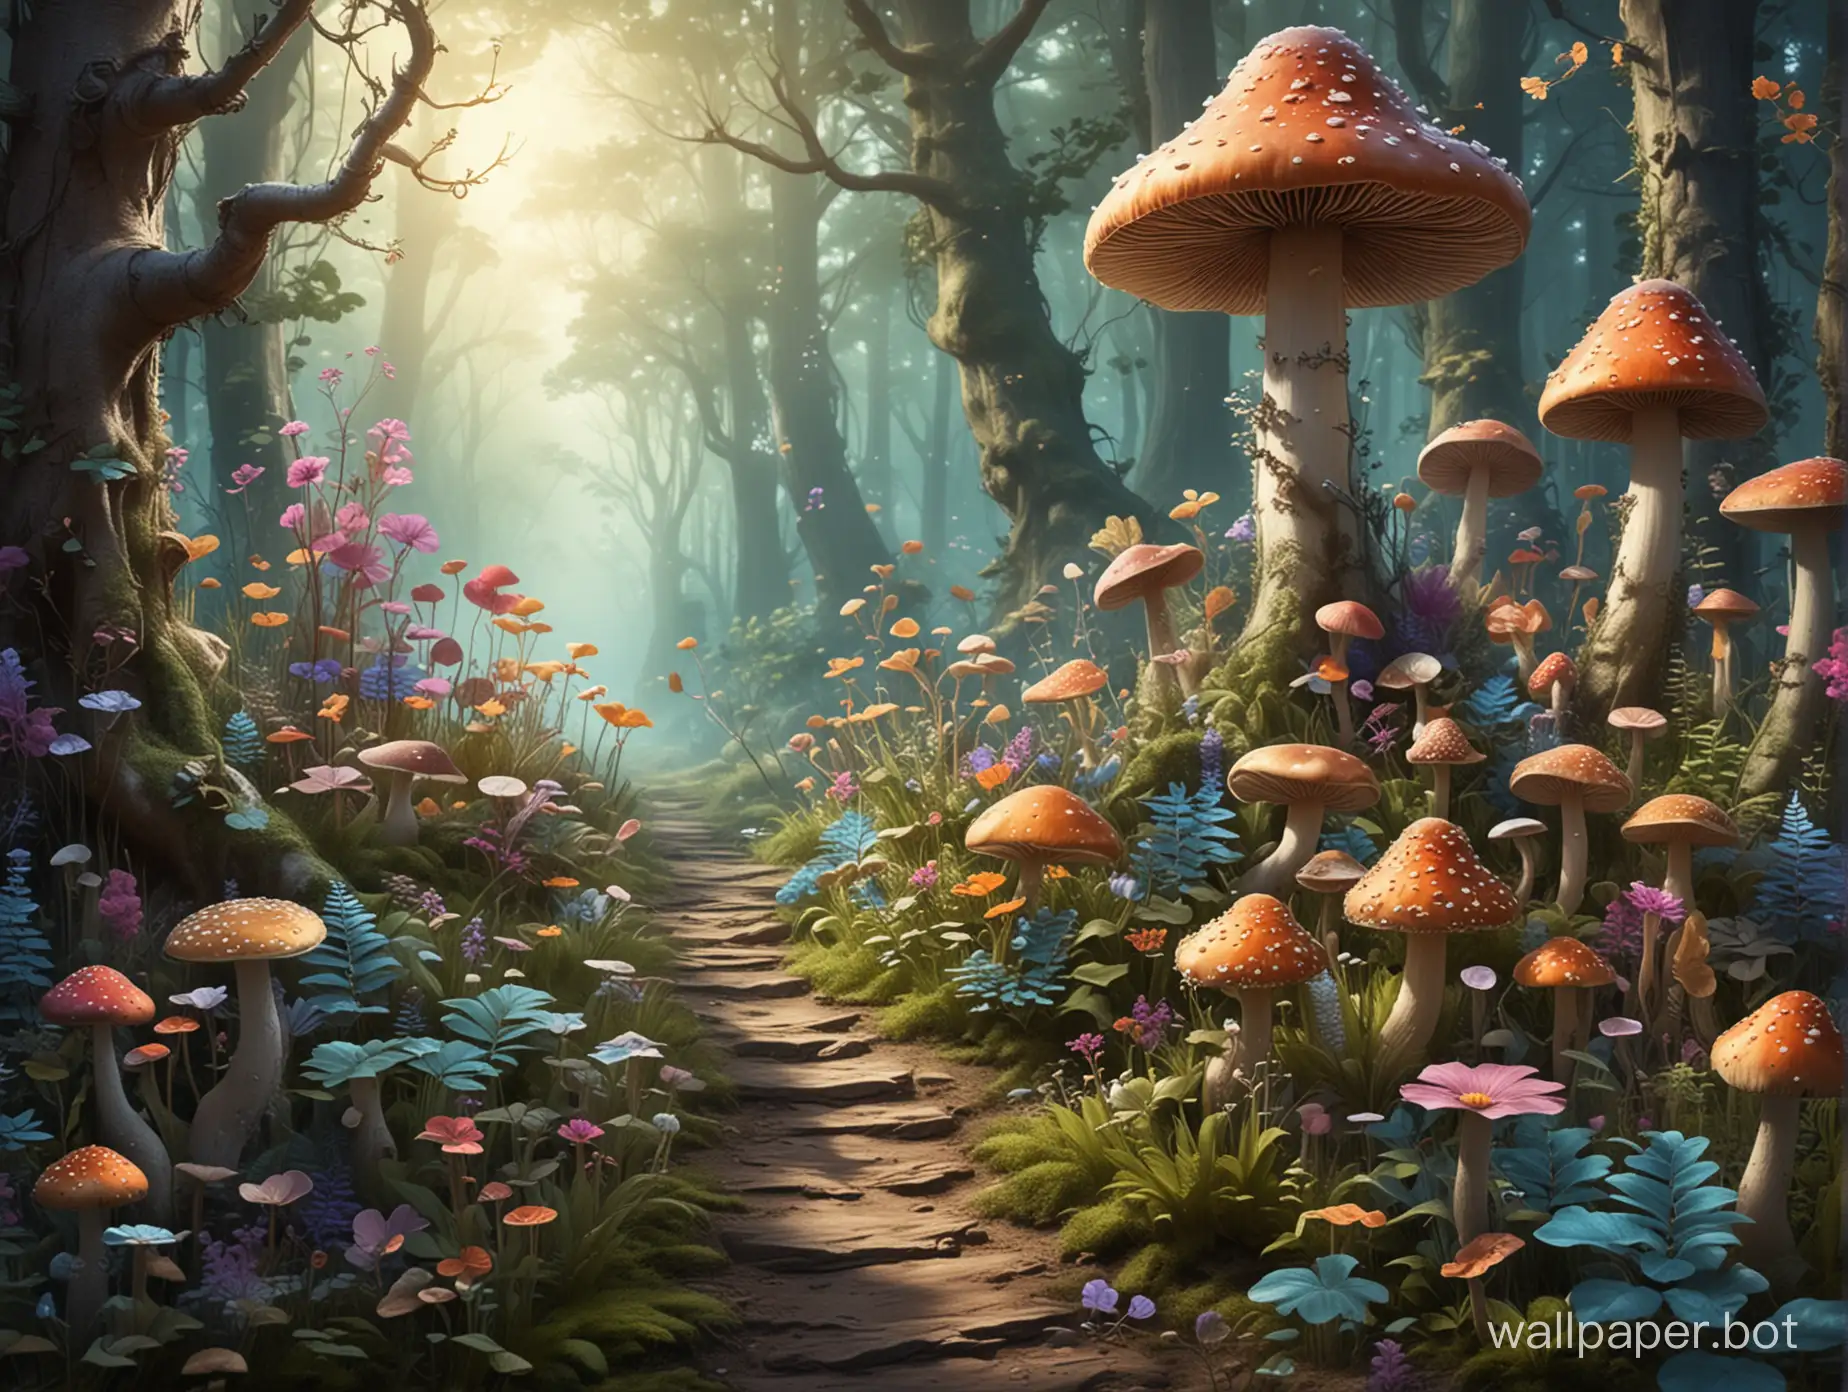 Fantasy forest with flowers, mushrooms and plants in artsy style